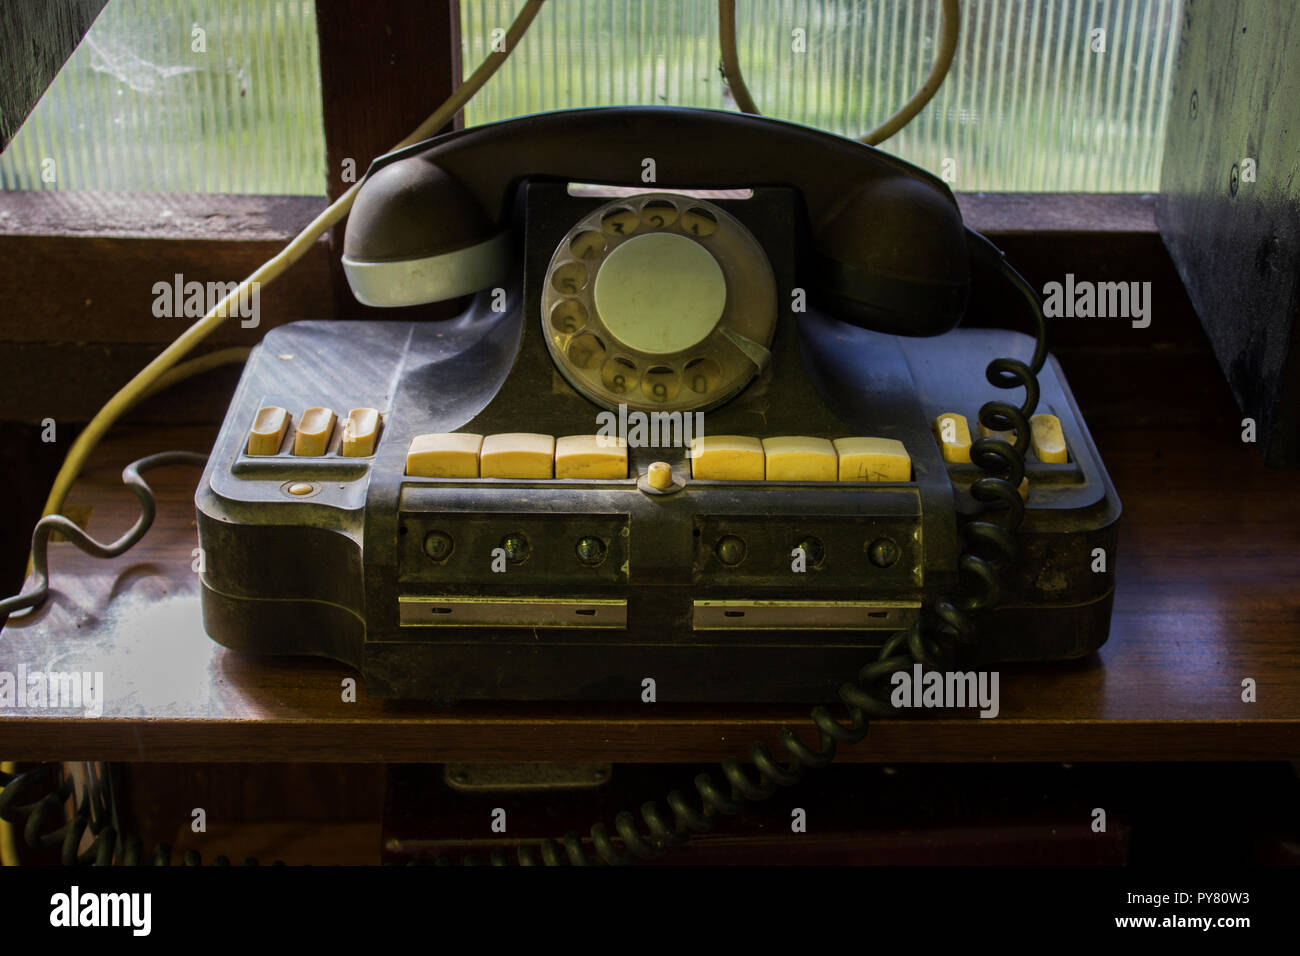 Vintage dusty black rotary telephone on the shelf as part of the collection. Russia, reportage photo Stock Photo